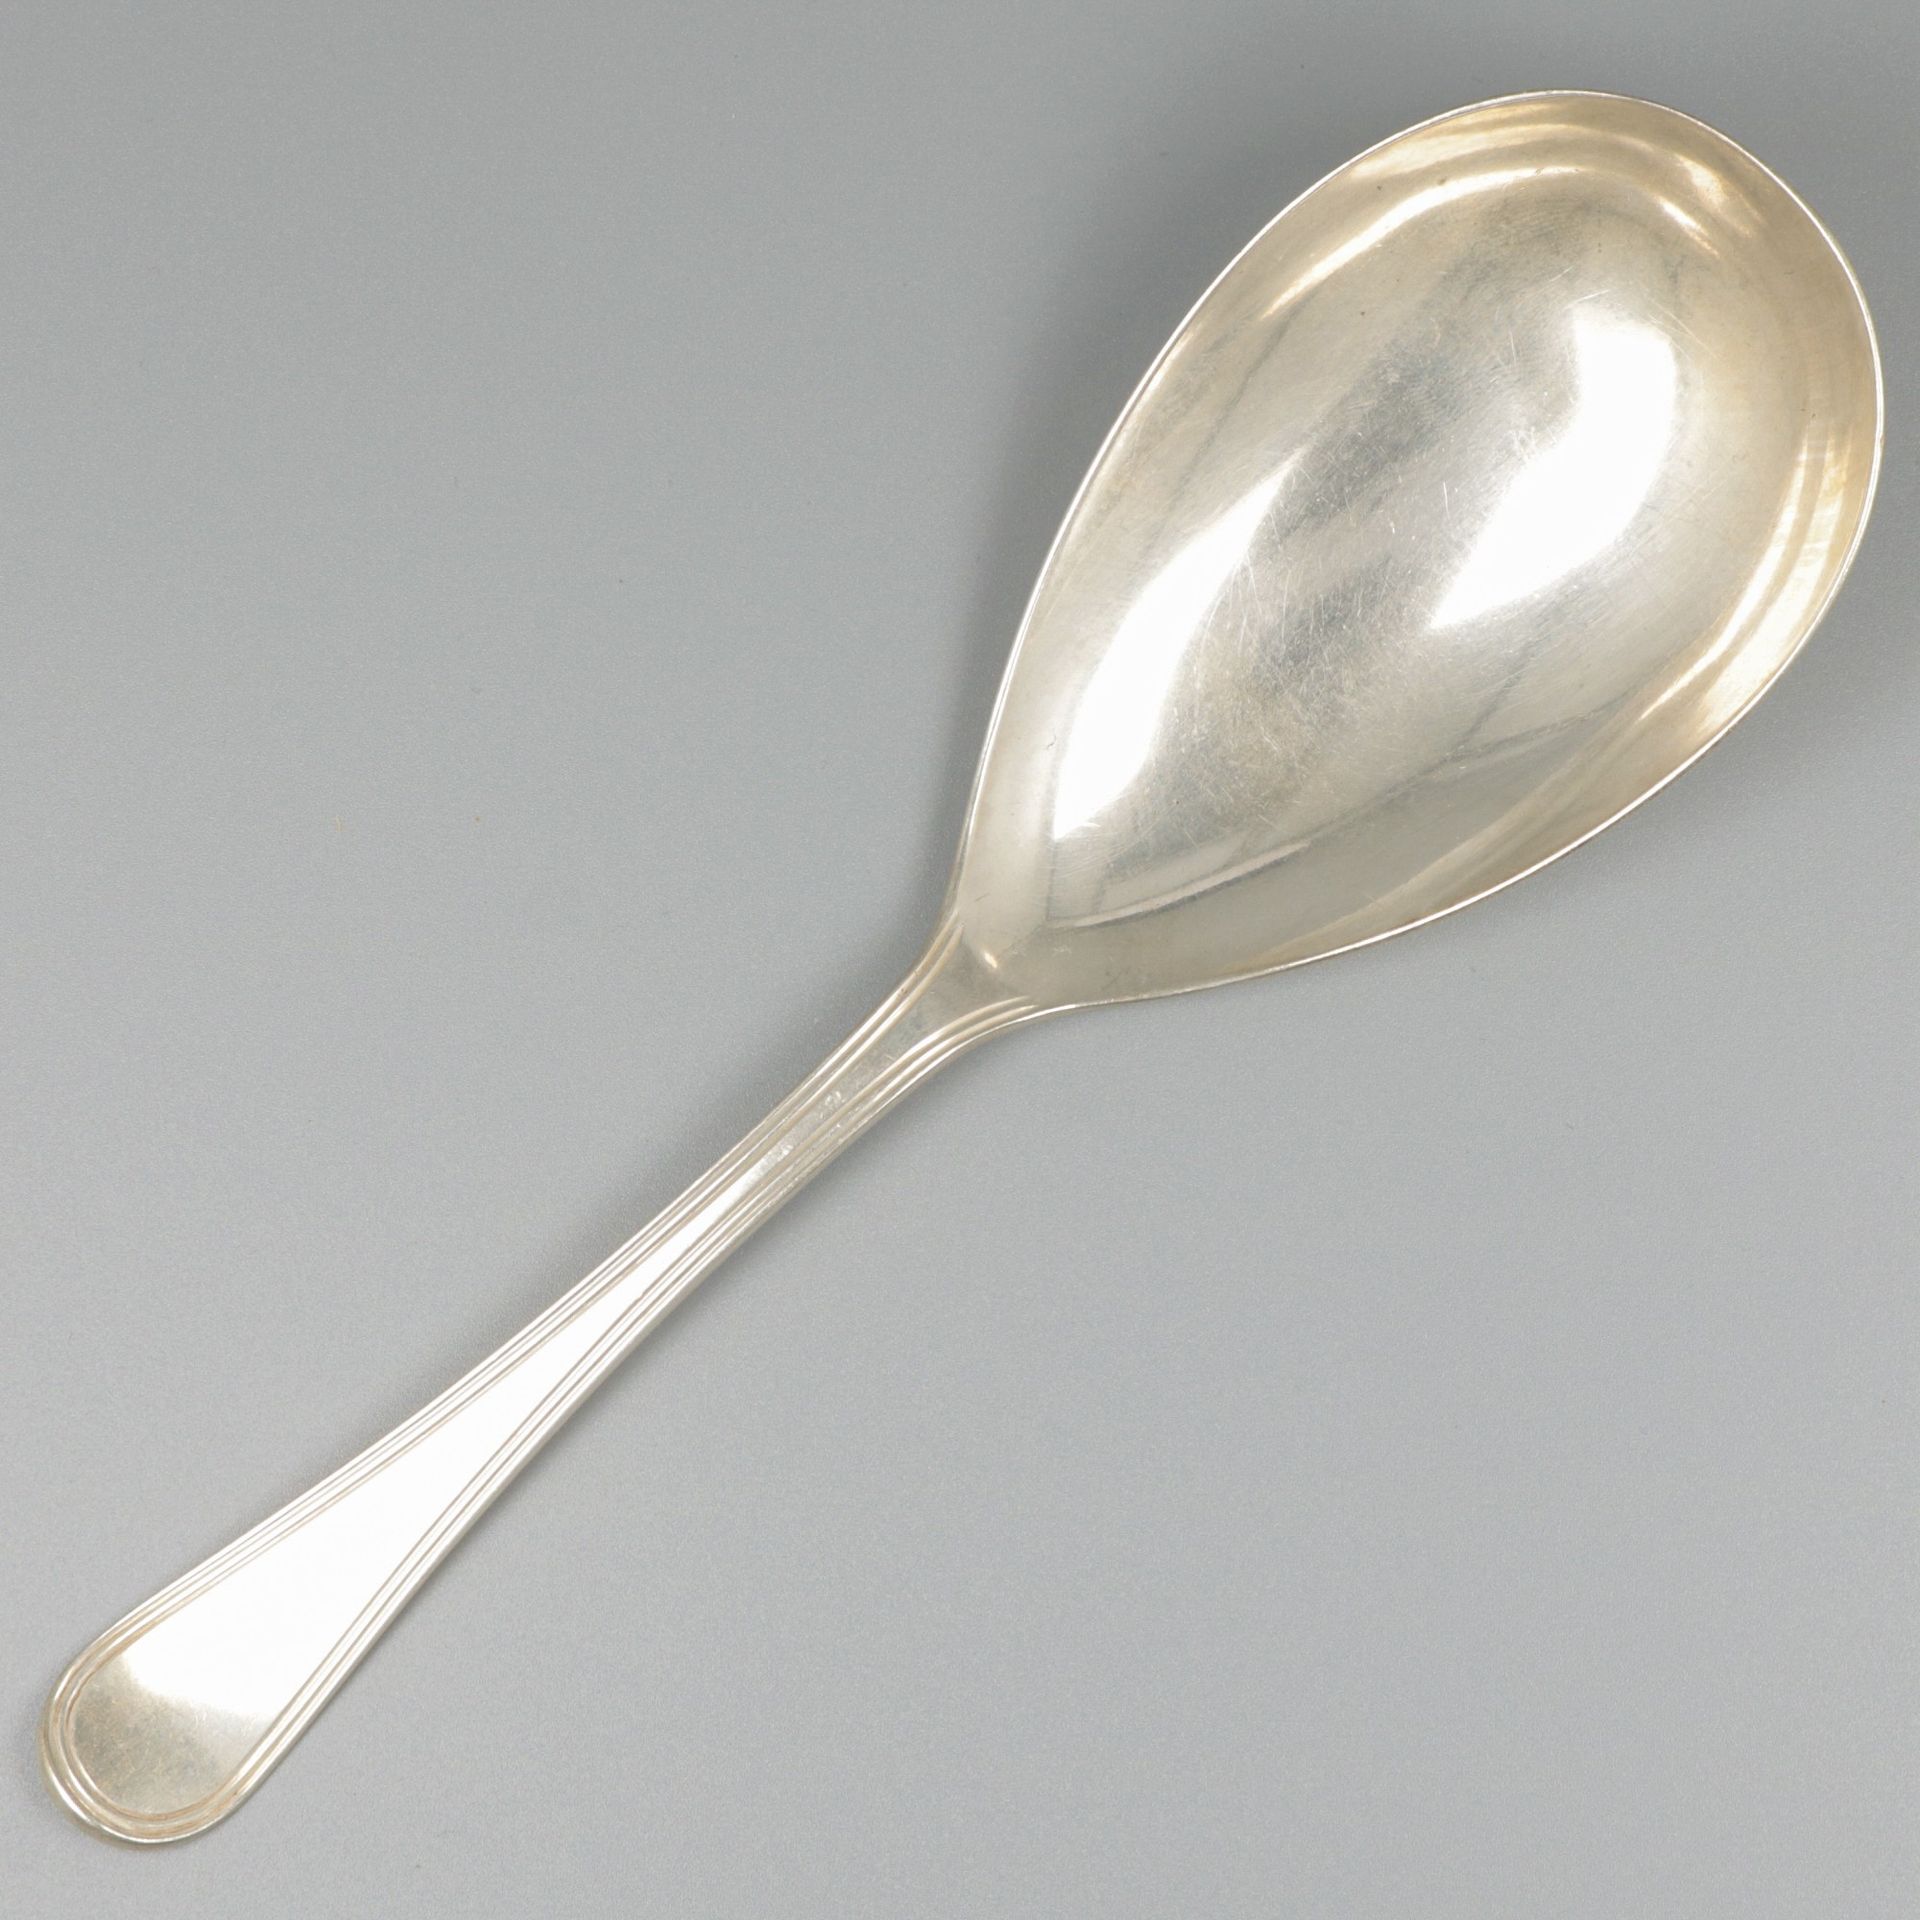 Rice spoon silver. "Hollands Rondfilet" or Dutch Round Filet. The Netherlands, A&hellip;